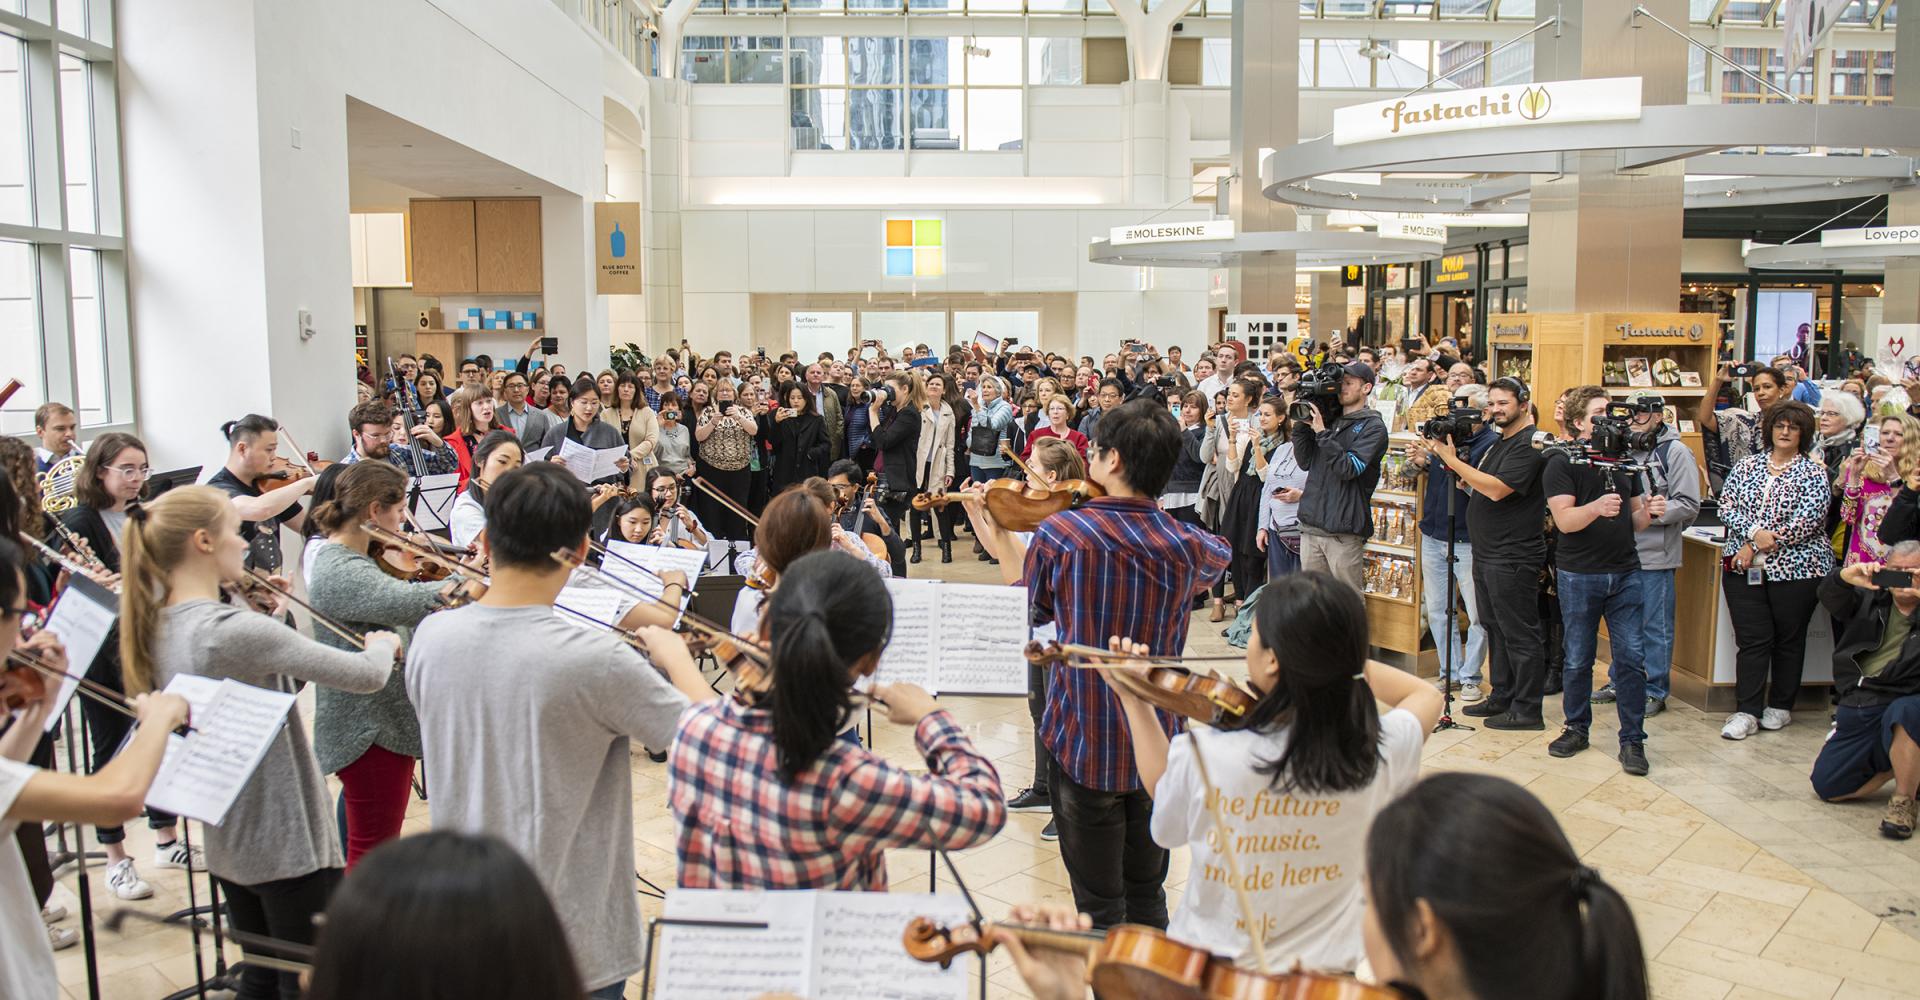 The flash mob orchestra plays